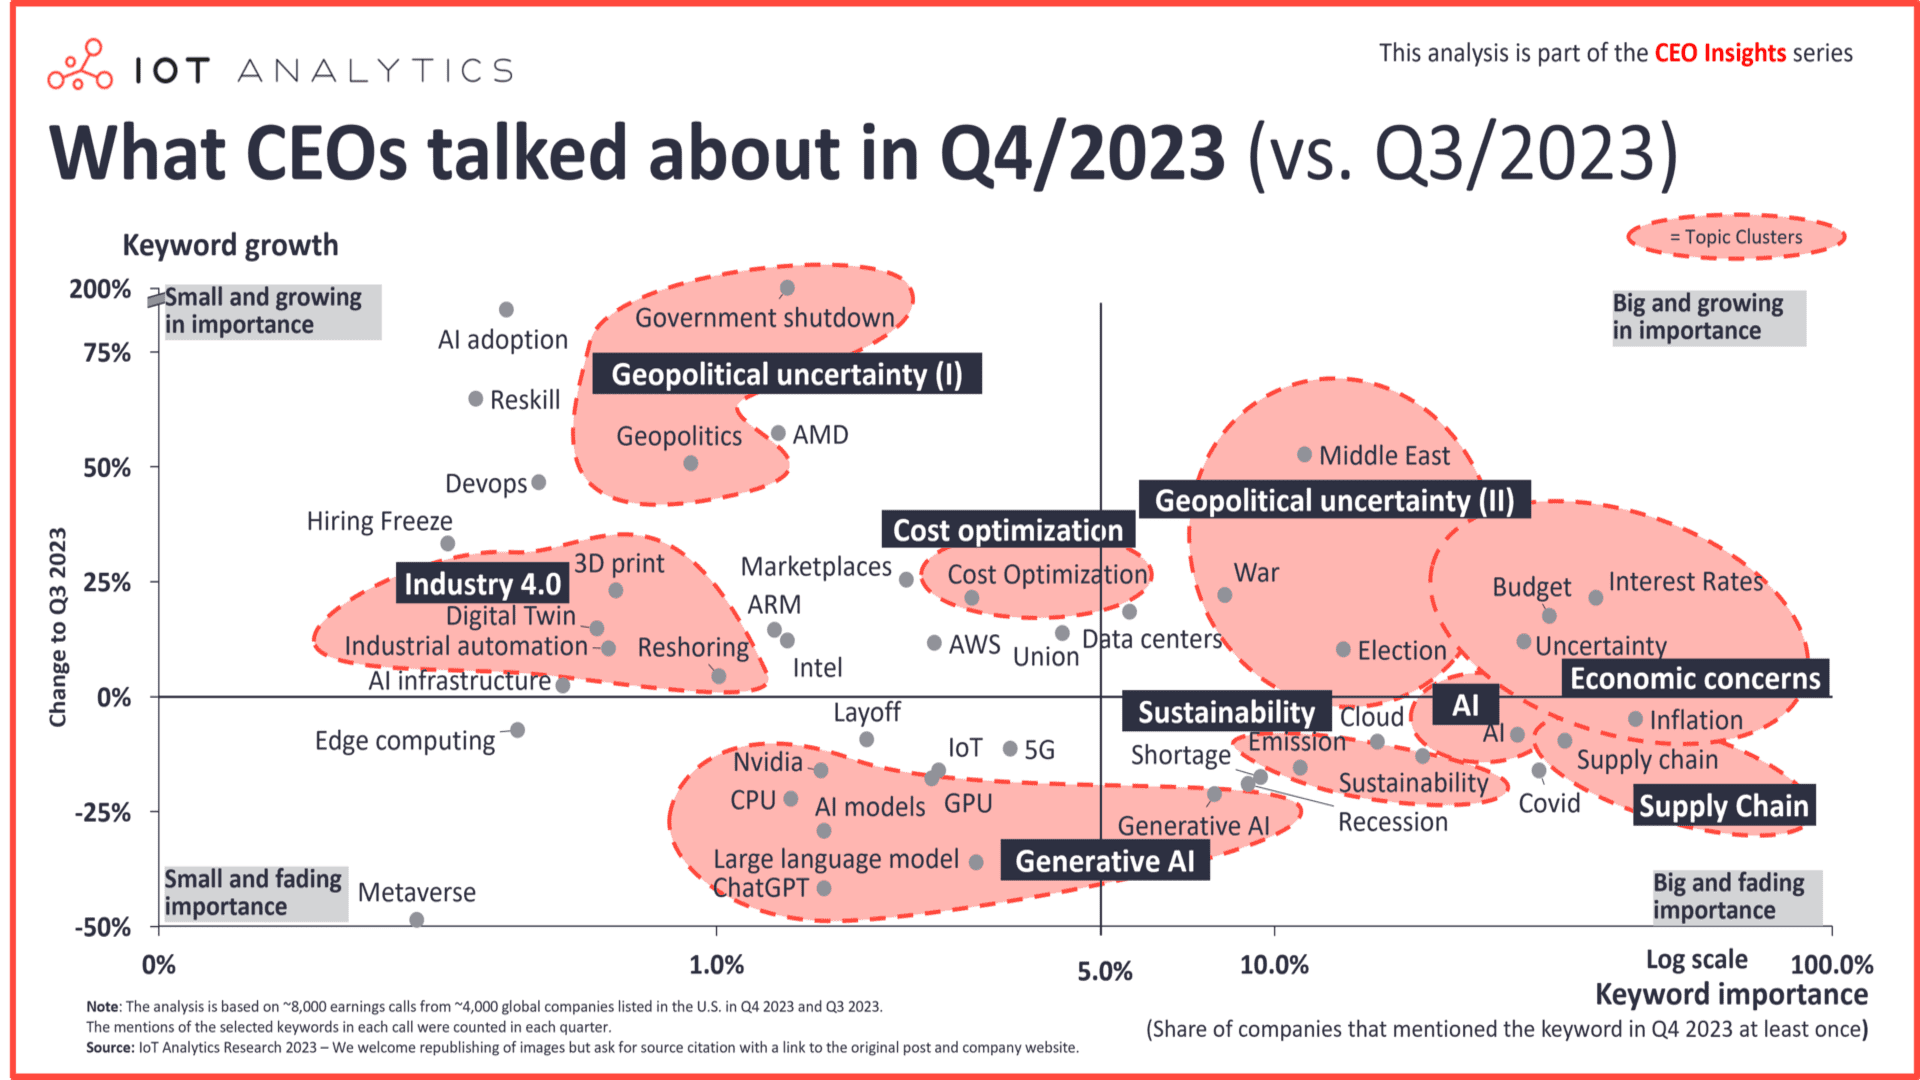 What CEOs talked about in Q4 2023